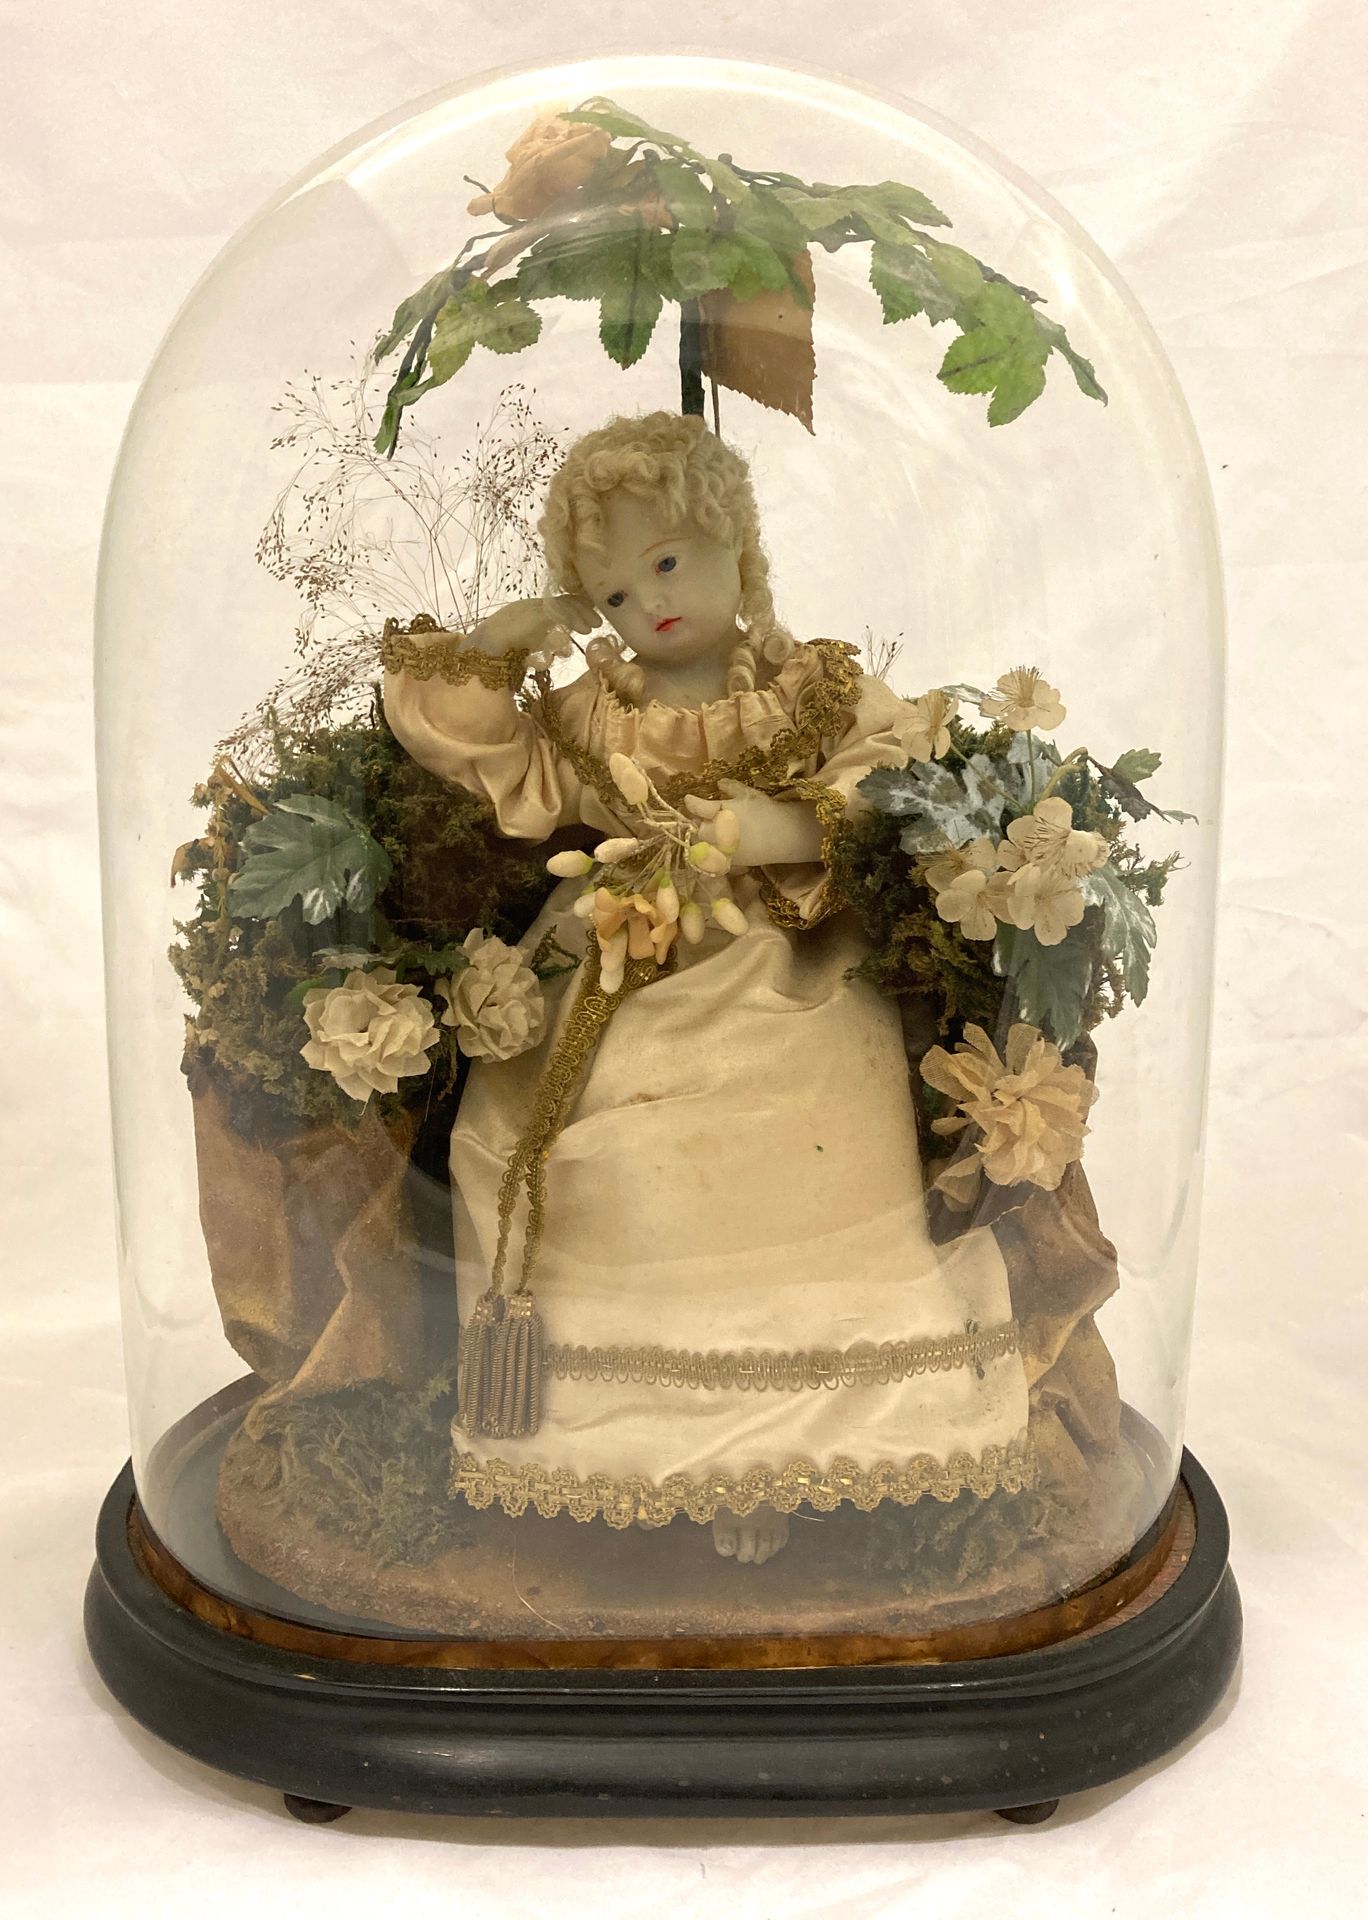 Null 
"Paradise of the Infant Jesus"

Under a blown glass globe, a wax sculpture&hellip;